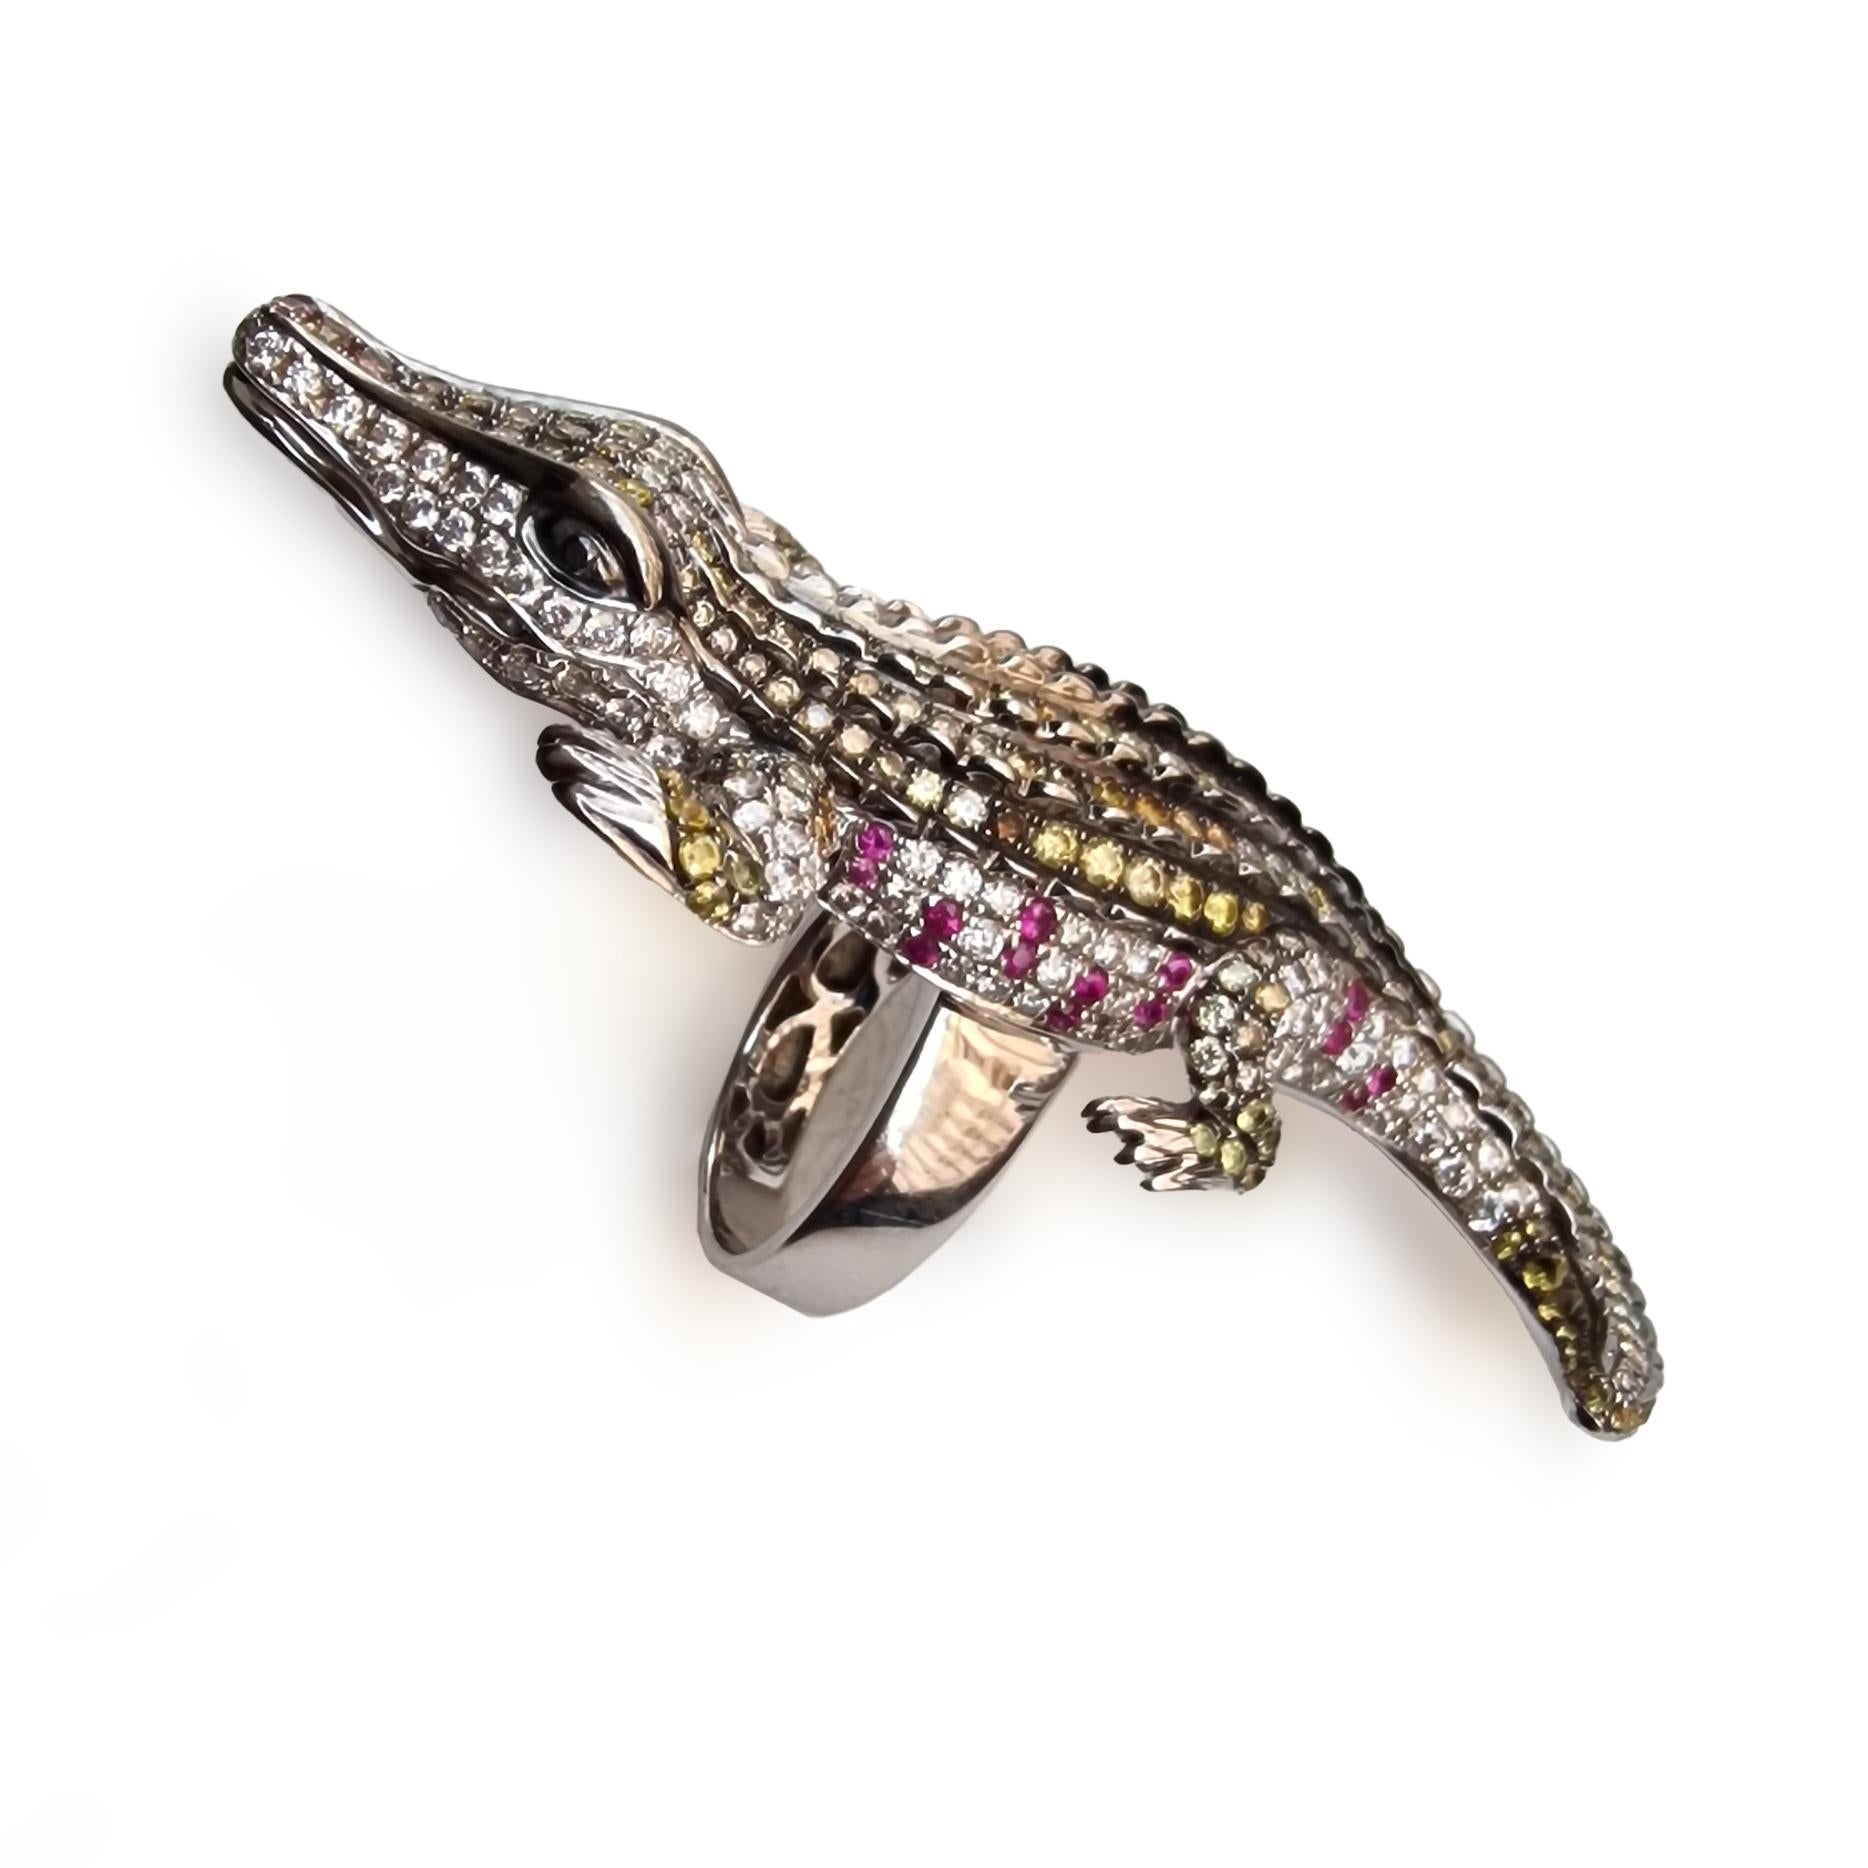 Crocodile Diamond White Gold 18K Ring.
Diamond approx. 3-4 carat.
Gross weight: 27.66 grams
Ring size: 6 1/2

Crocodile measurements: 
Length: 6.80 centimeters
Width: 3.00 centimeters
Height: 1.00 centimeters